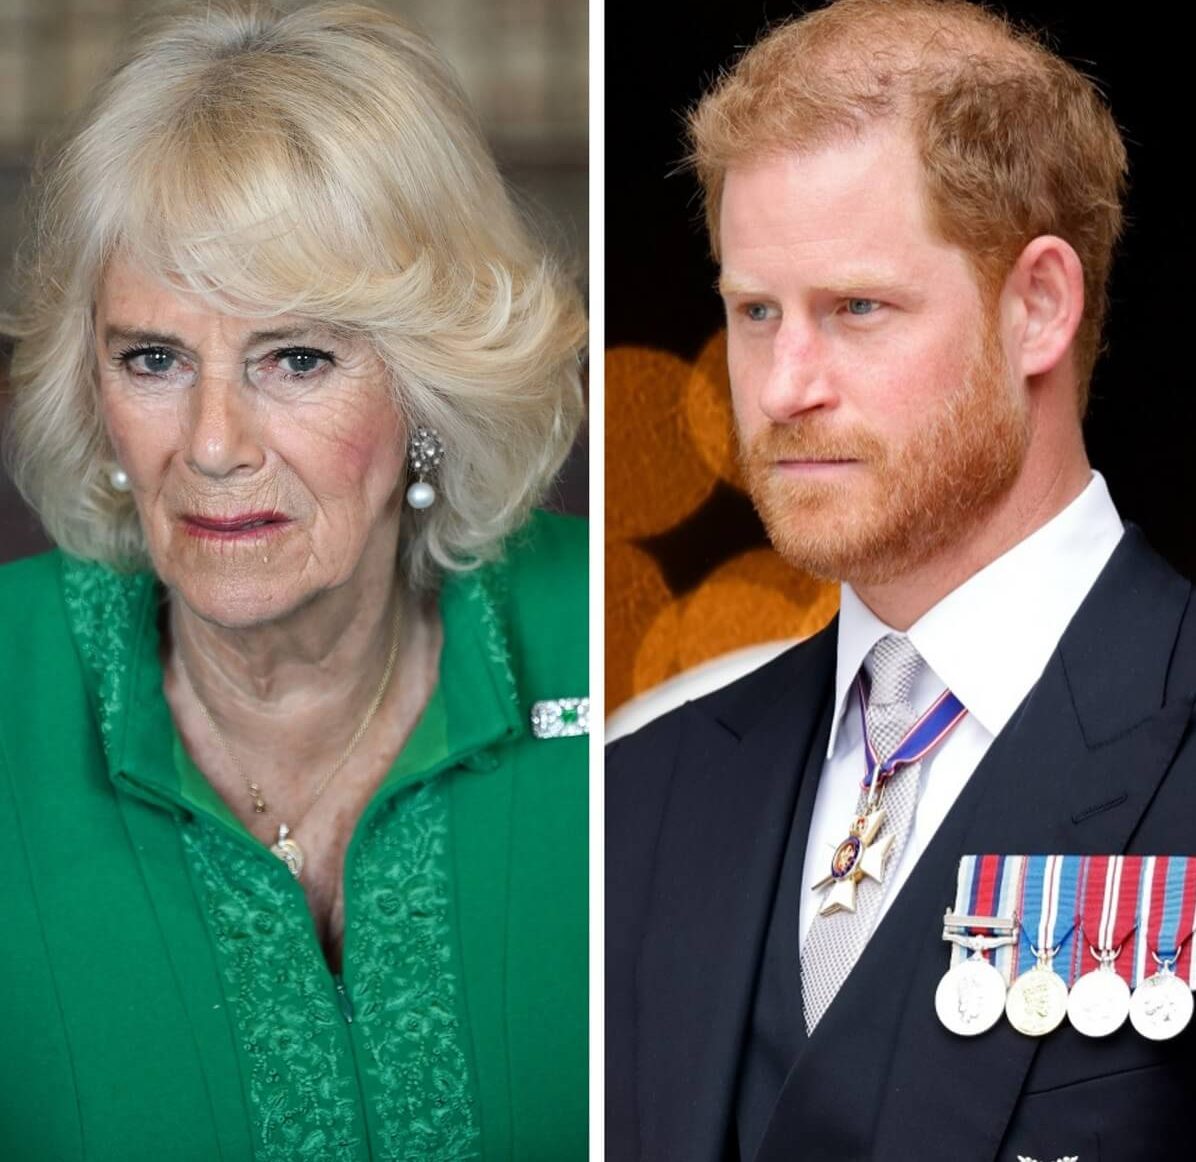 Queen Camilla Was ‘Outraged’ by Prince Harry’s ‘Attitude’ During His Meeting With King Charles, According to Palace Courtier